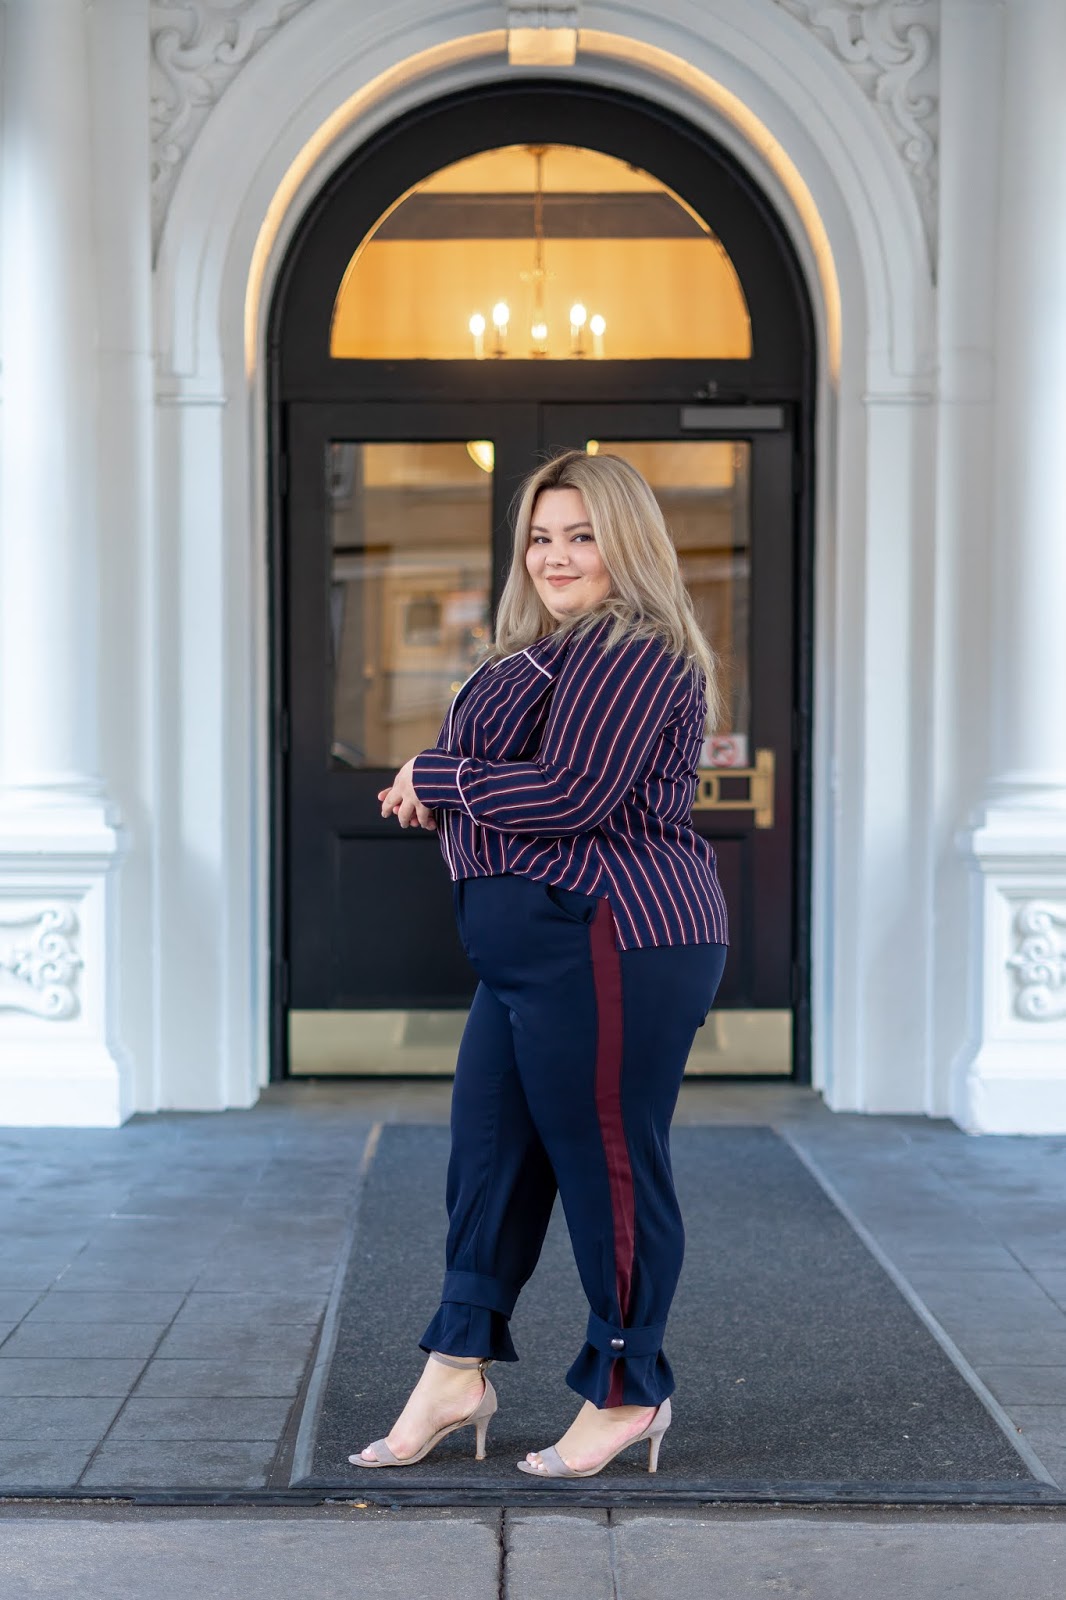 Chicago Plus Size Petite Fashion Blogger and model Natalie Craig reviews Soncy's, a new plus size boutique, Suit Up High Waisted Tuxedo Trousers and the Let's Hit Snooze Striped Top.